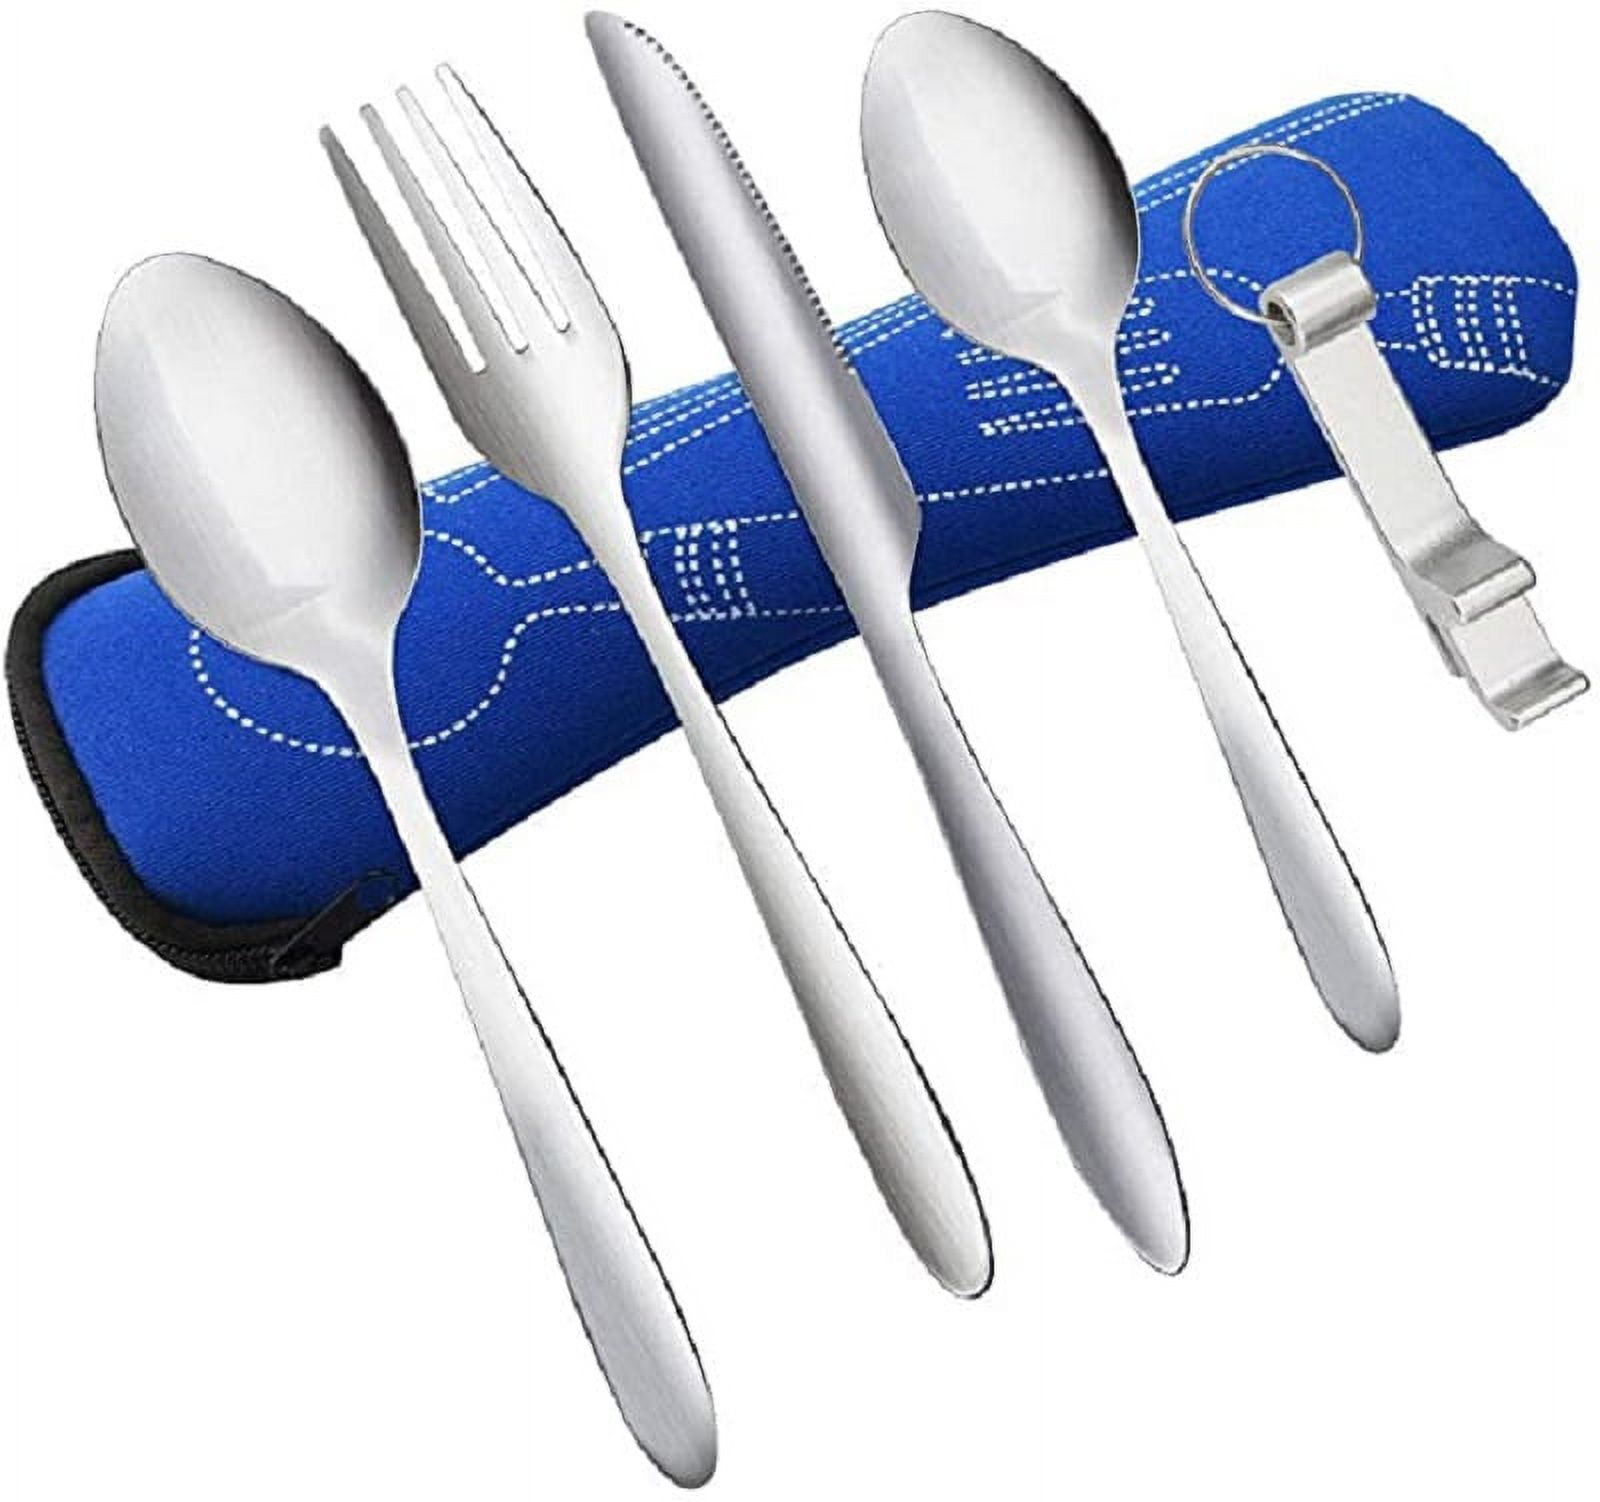 Travel Cutlery Set With Case, Plastic Cutlery Set Reusable, Portable Cutlery  Set For Lunch Box School Picnic Travel Camping Or Daily Use ( Orange +y